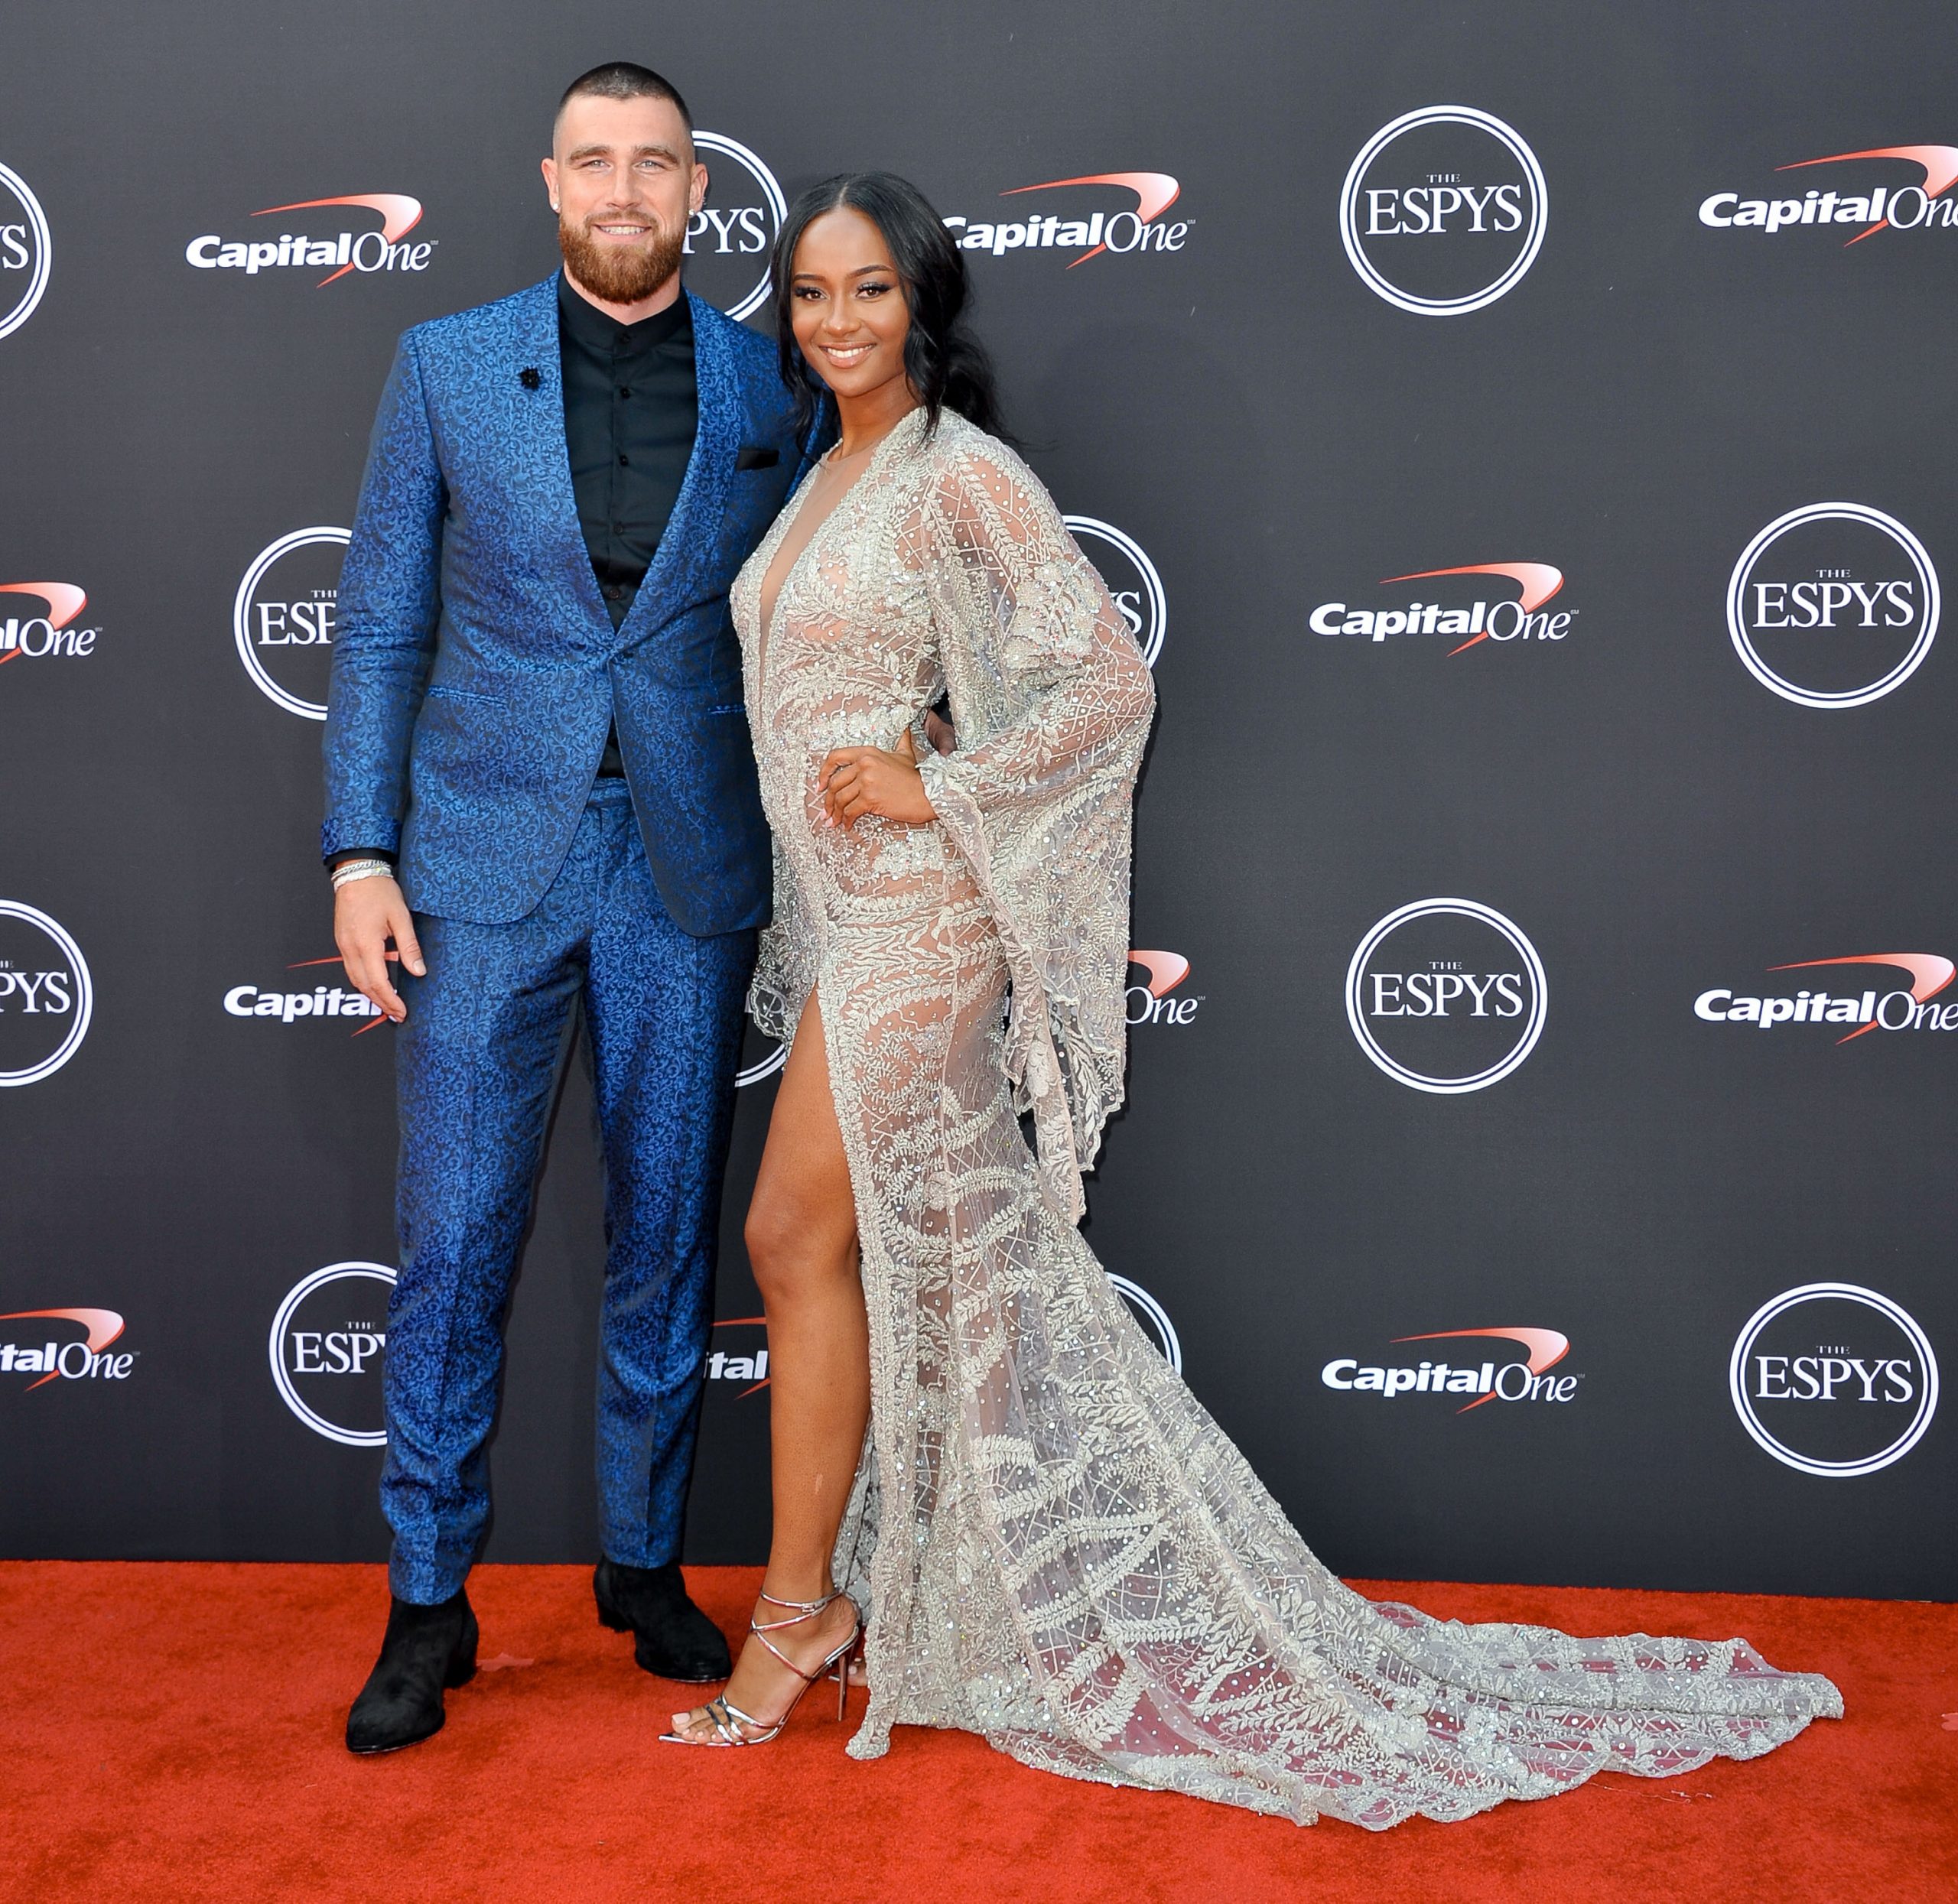 Travis Kelce's girlfriend relives Chiefs glory before Super Bowl 2021